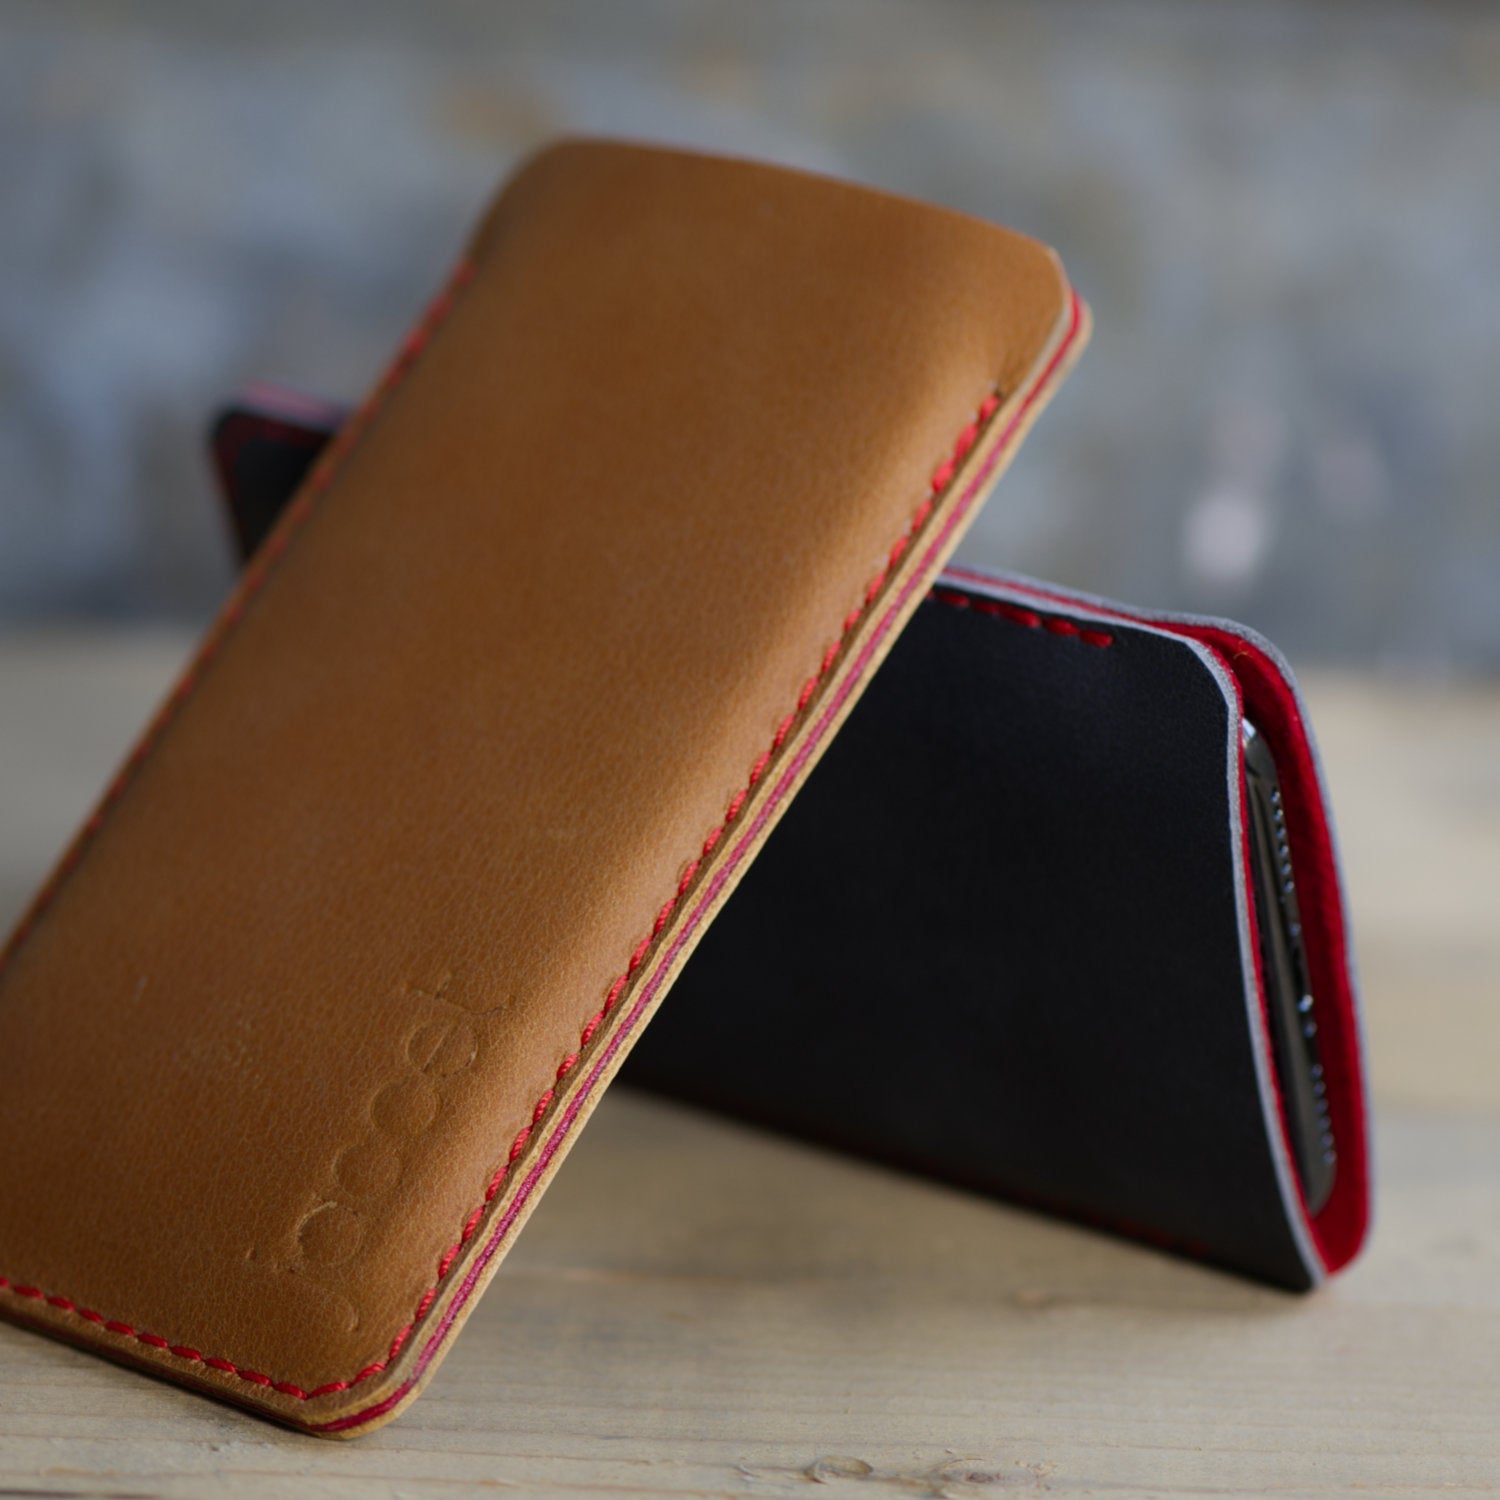 JACCET leather Samsung Galaxy sleeve - Cognac color leather with red wool felt - 100% Handmade